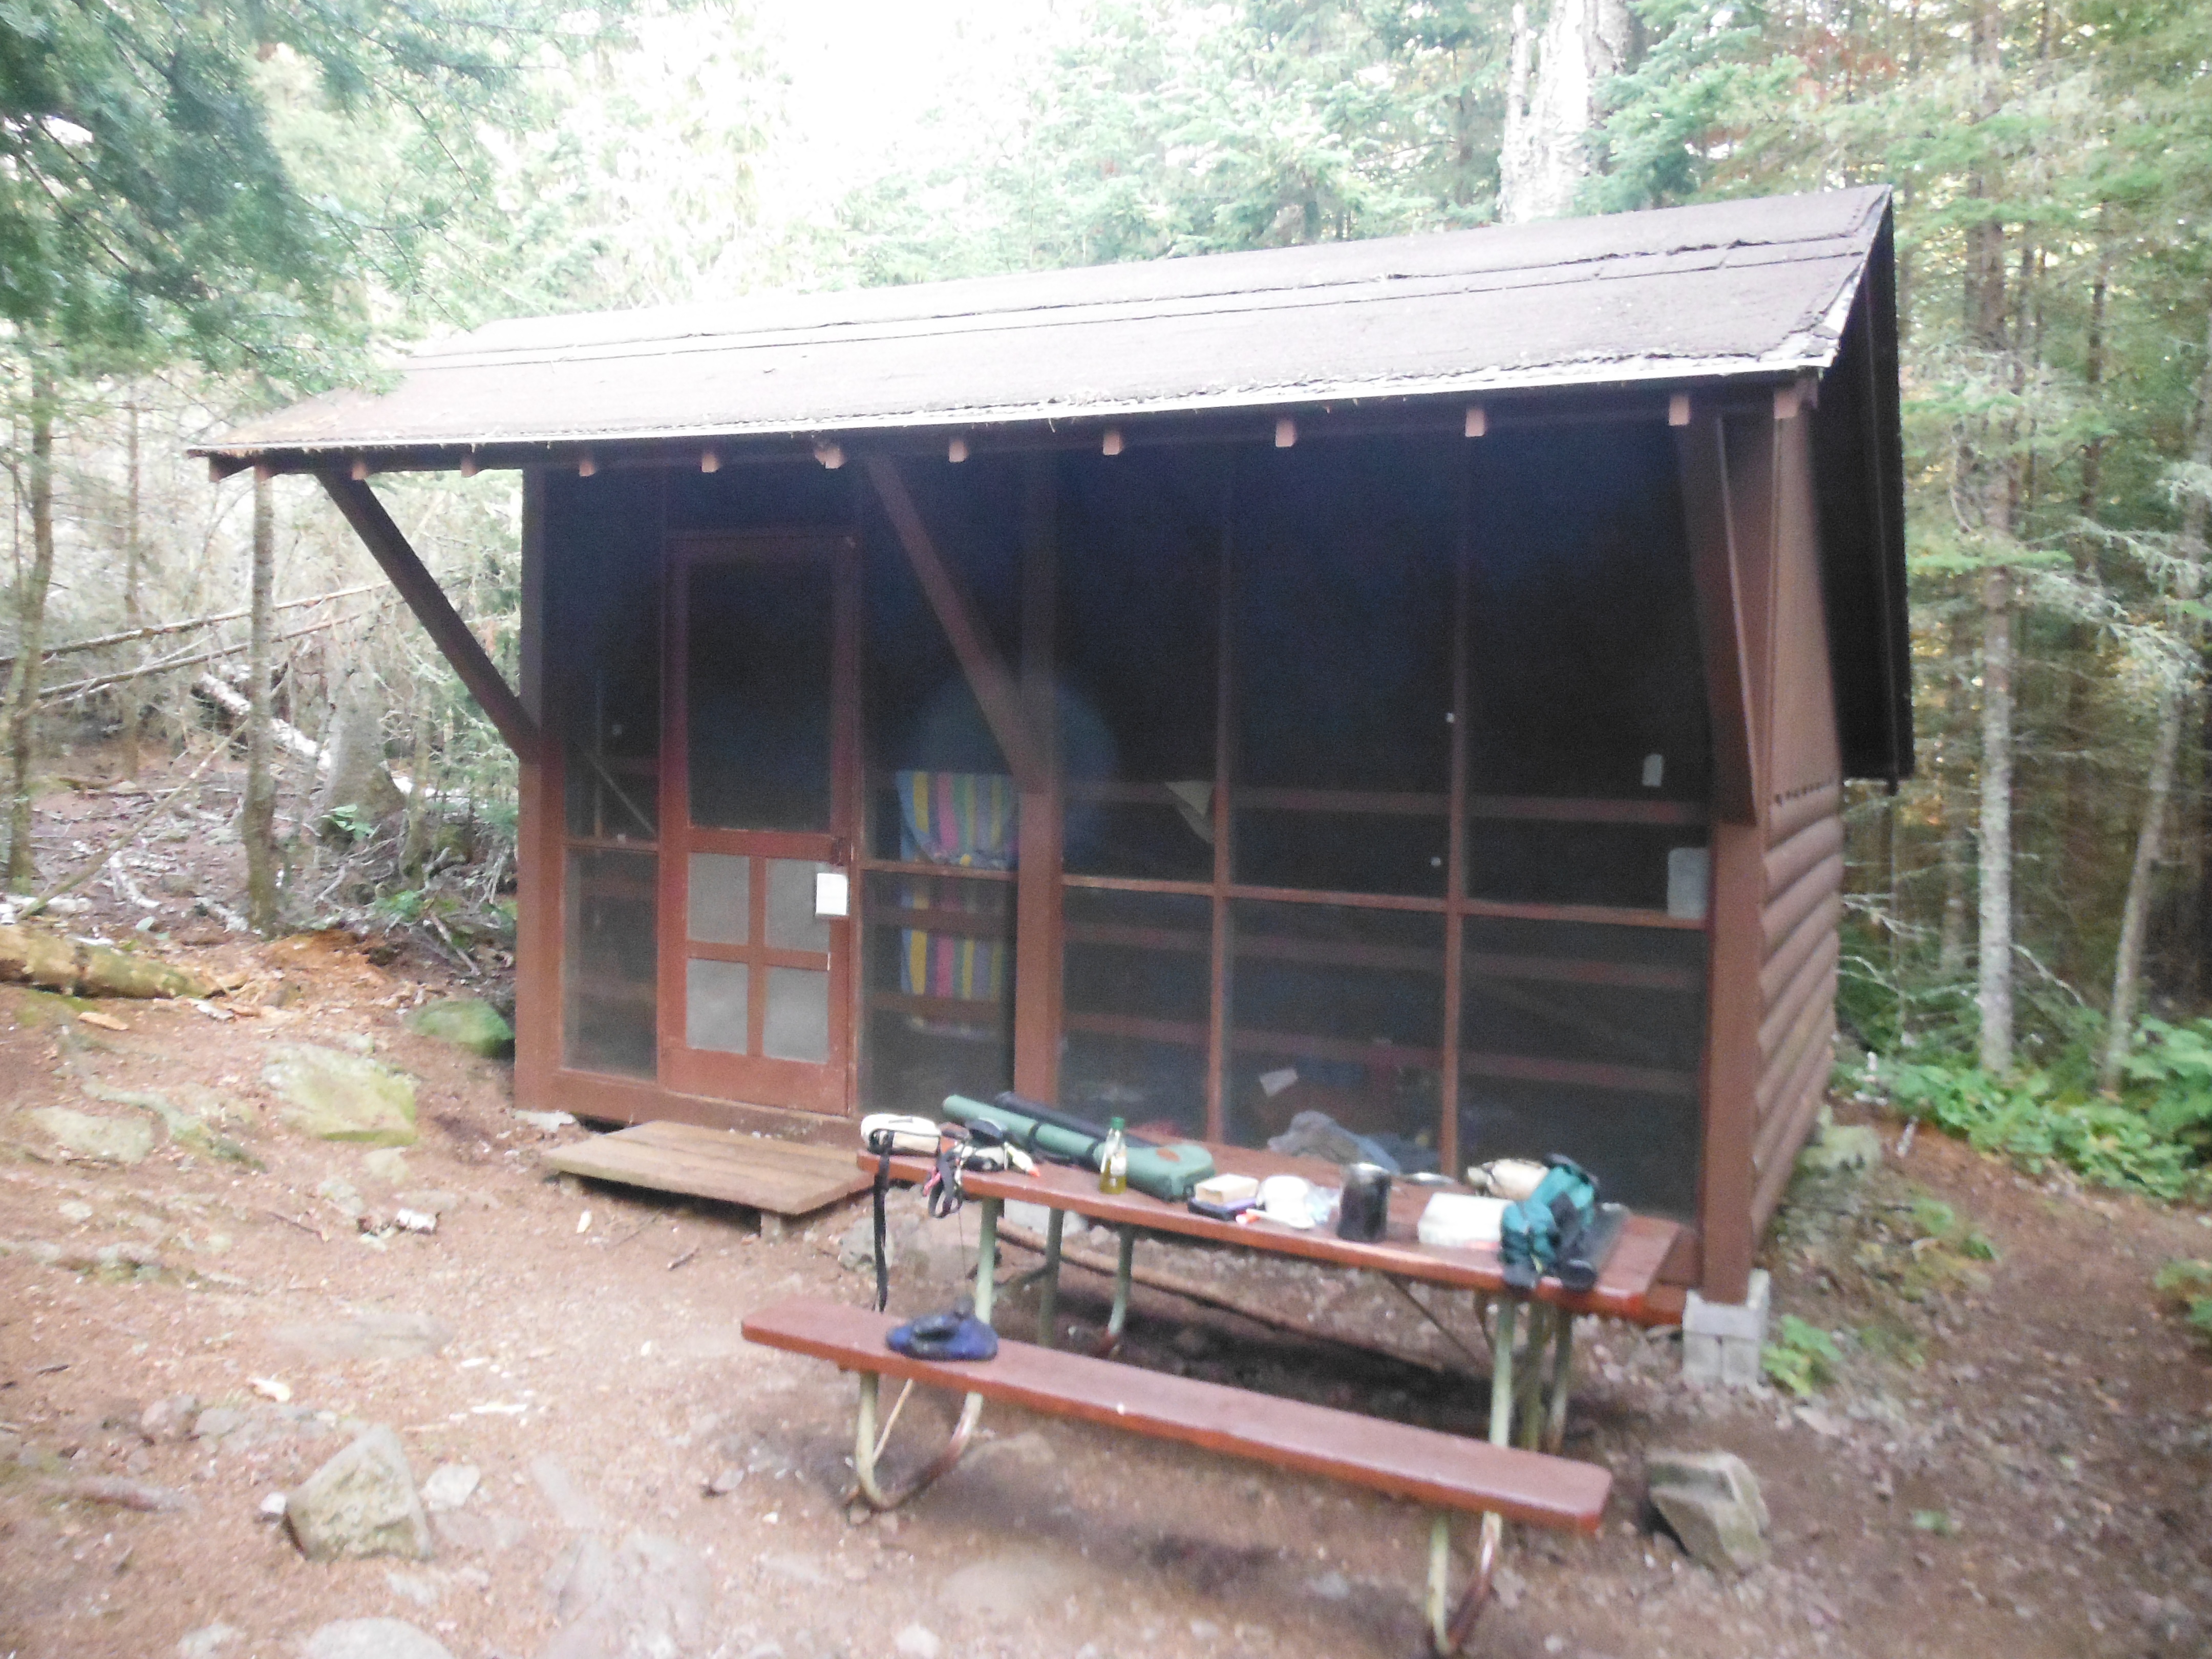 Shelter in which I stayed at Three Mile campground